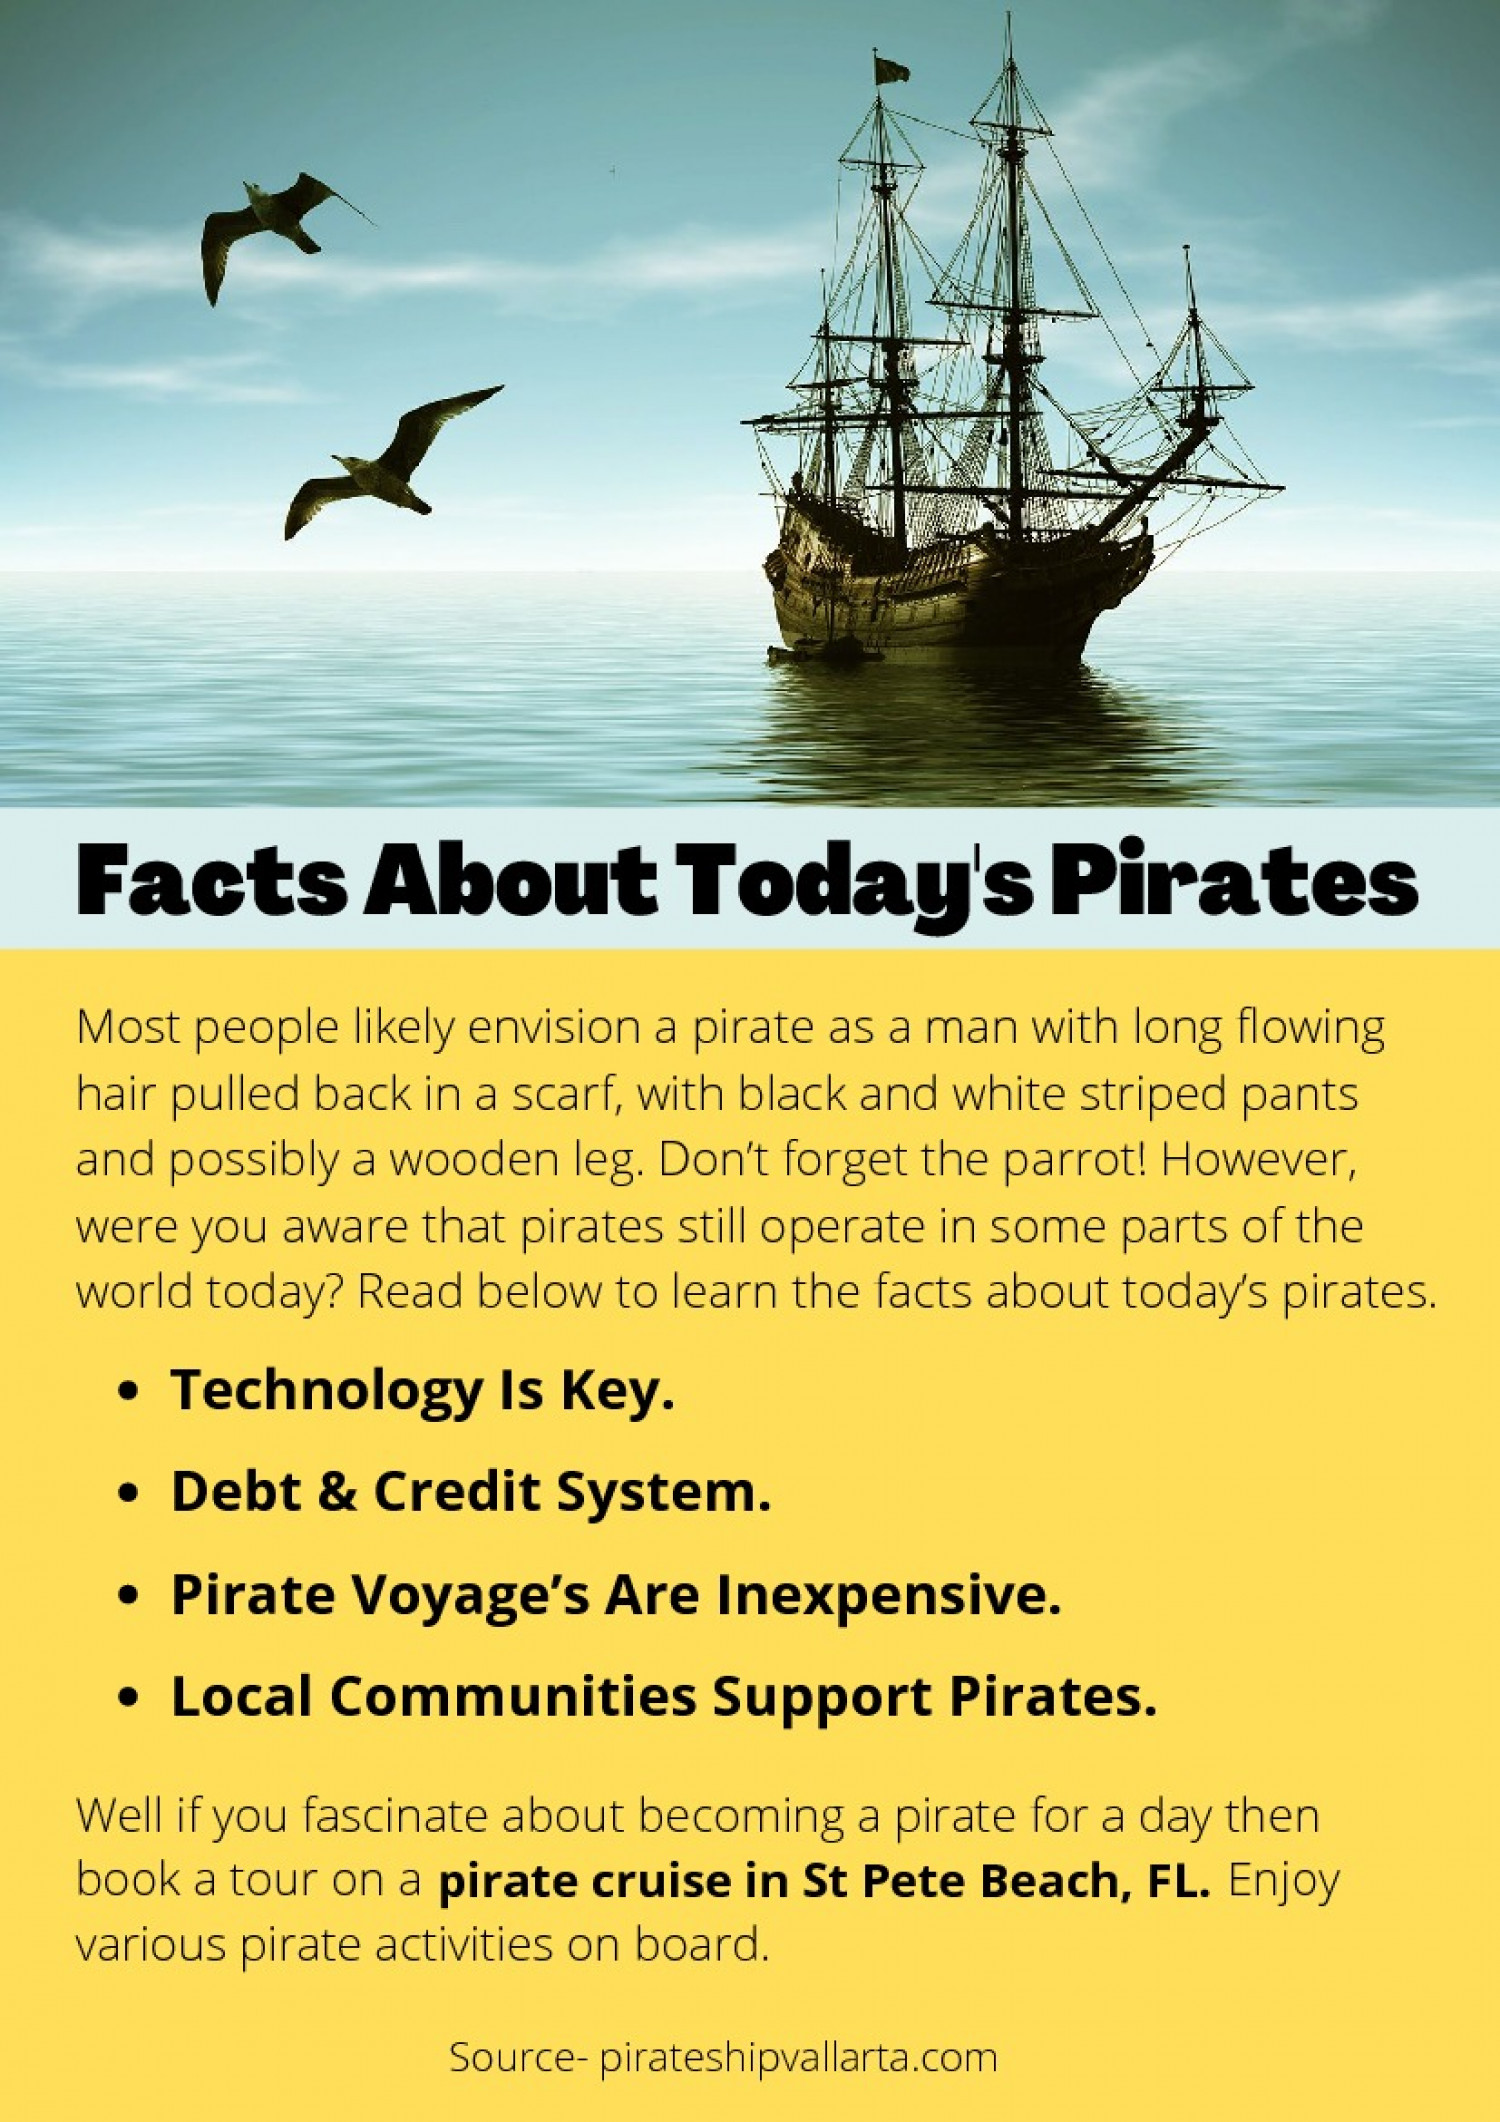 Facts About Today's Pirates Infographic